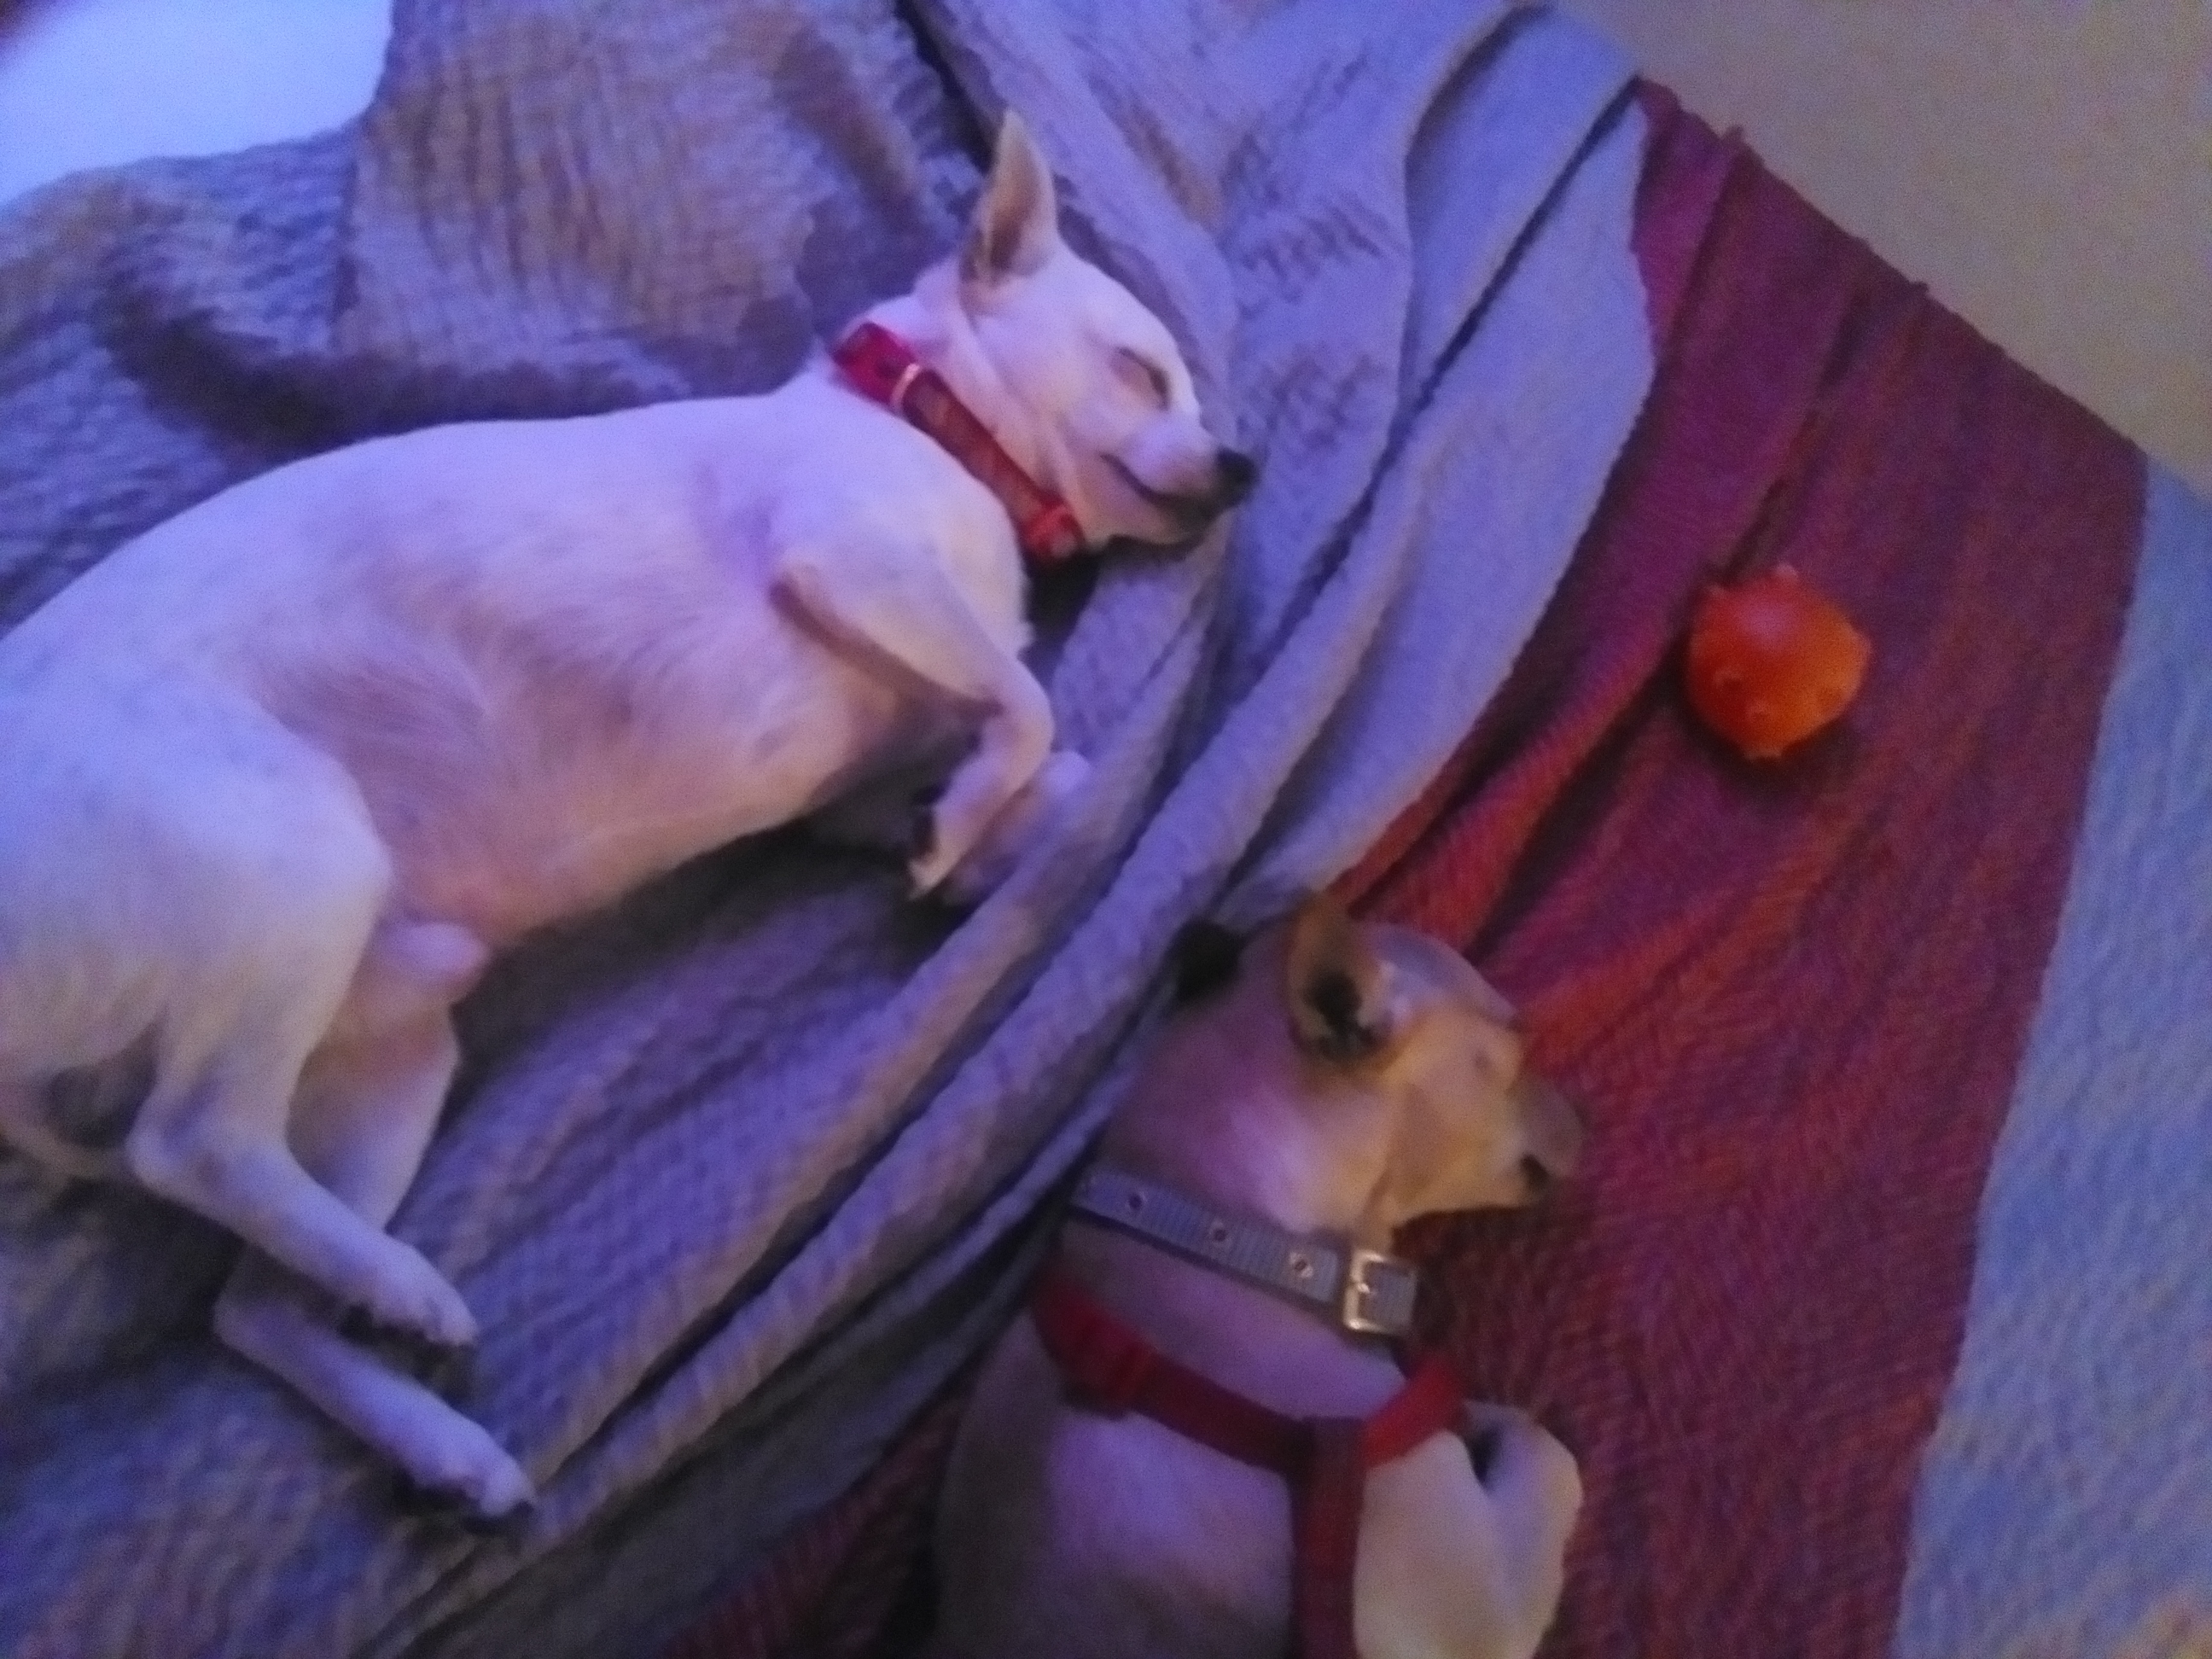 a picture of Migo and peanut a dog that needs a foster home.